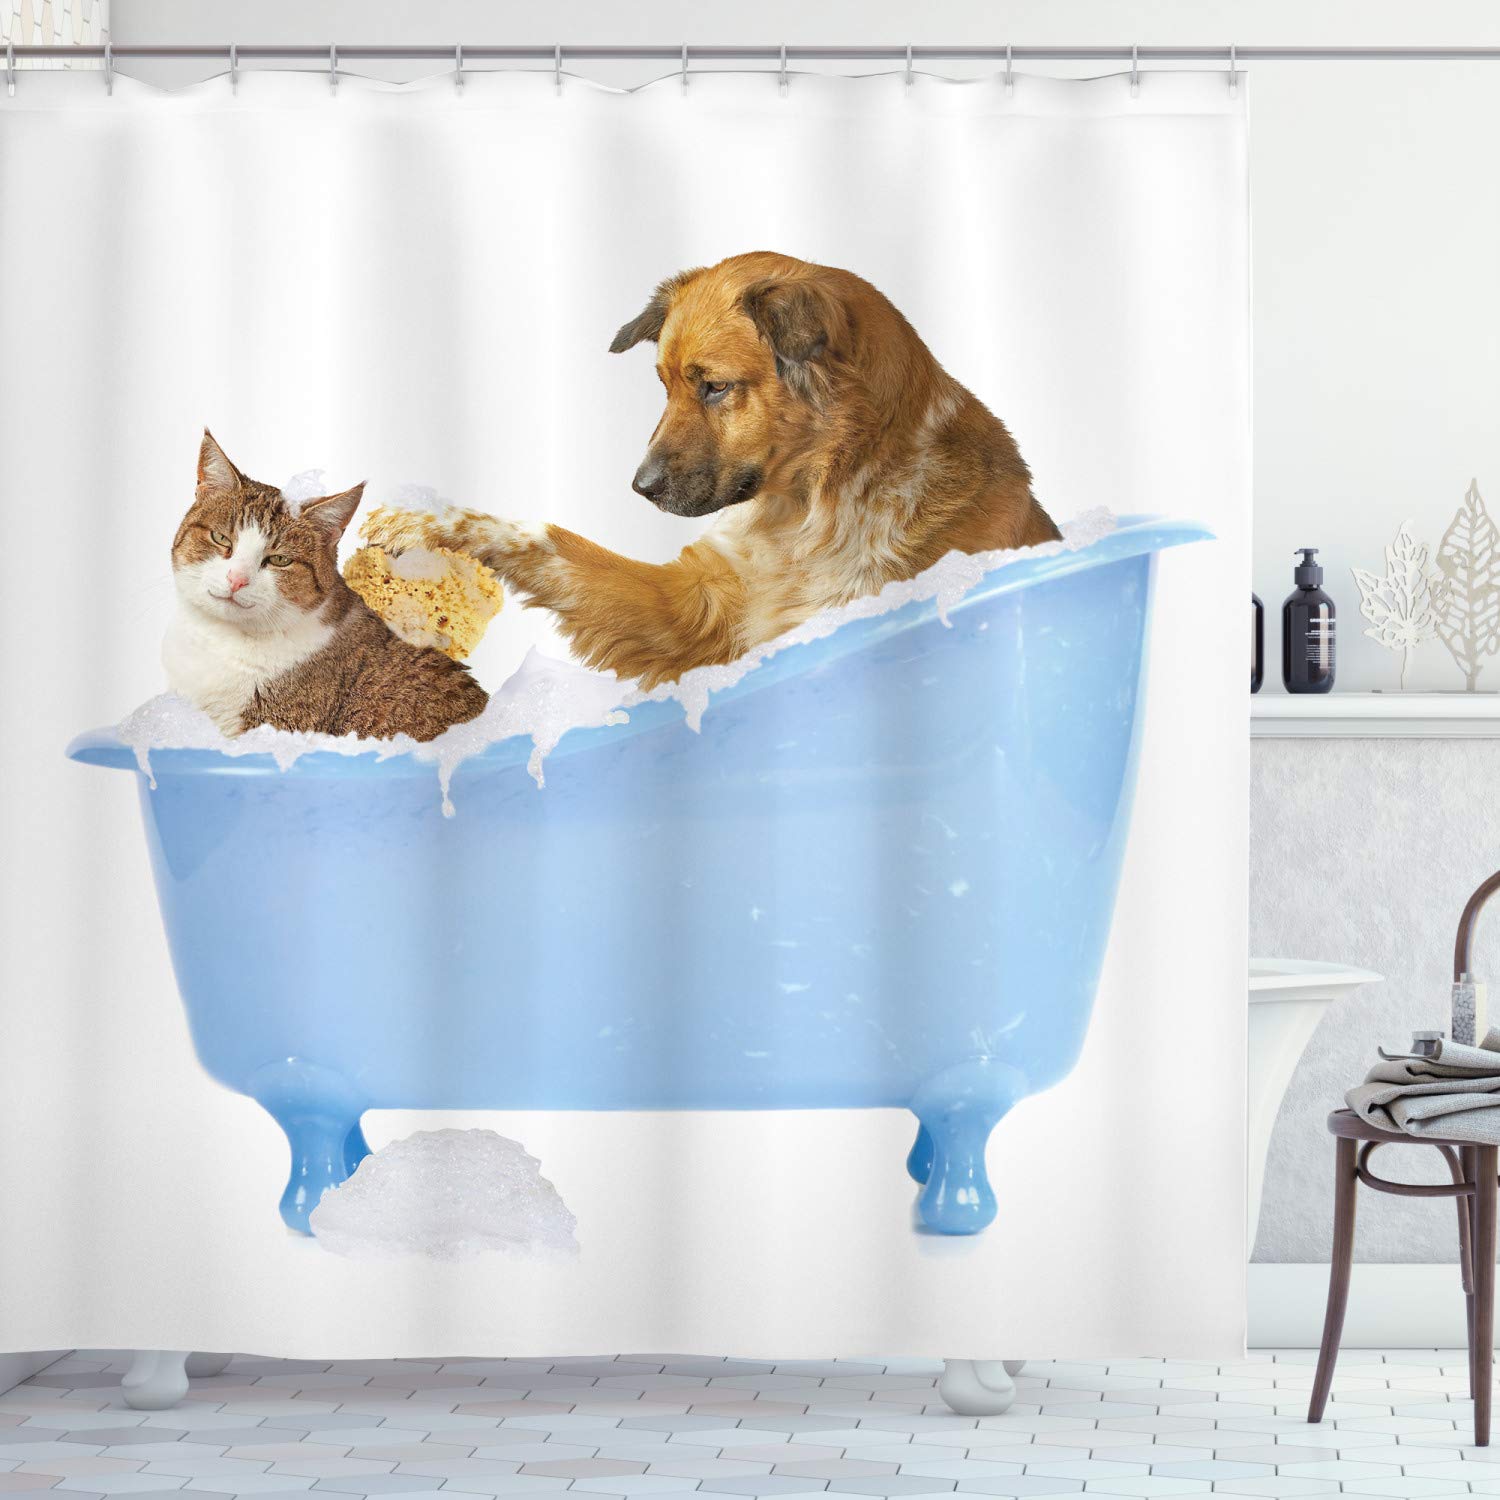 Ambesonne Cat Shower Curtain, Dog Kitty in The Bathtub Together Bubbles Shampooing Having Shower Fun Print, Cloth Fabric Bathroom Decor Set with Hooks, 70" Long, White Blue